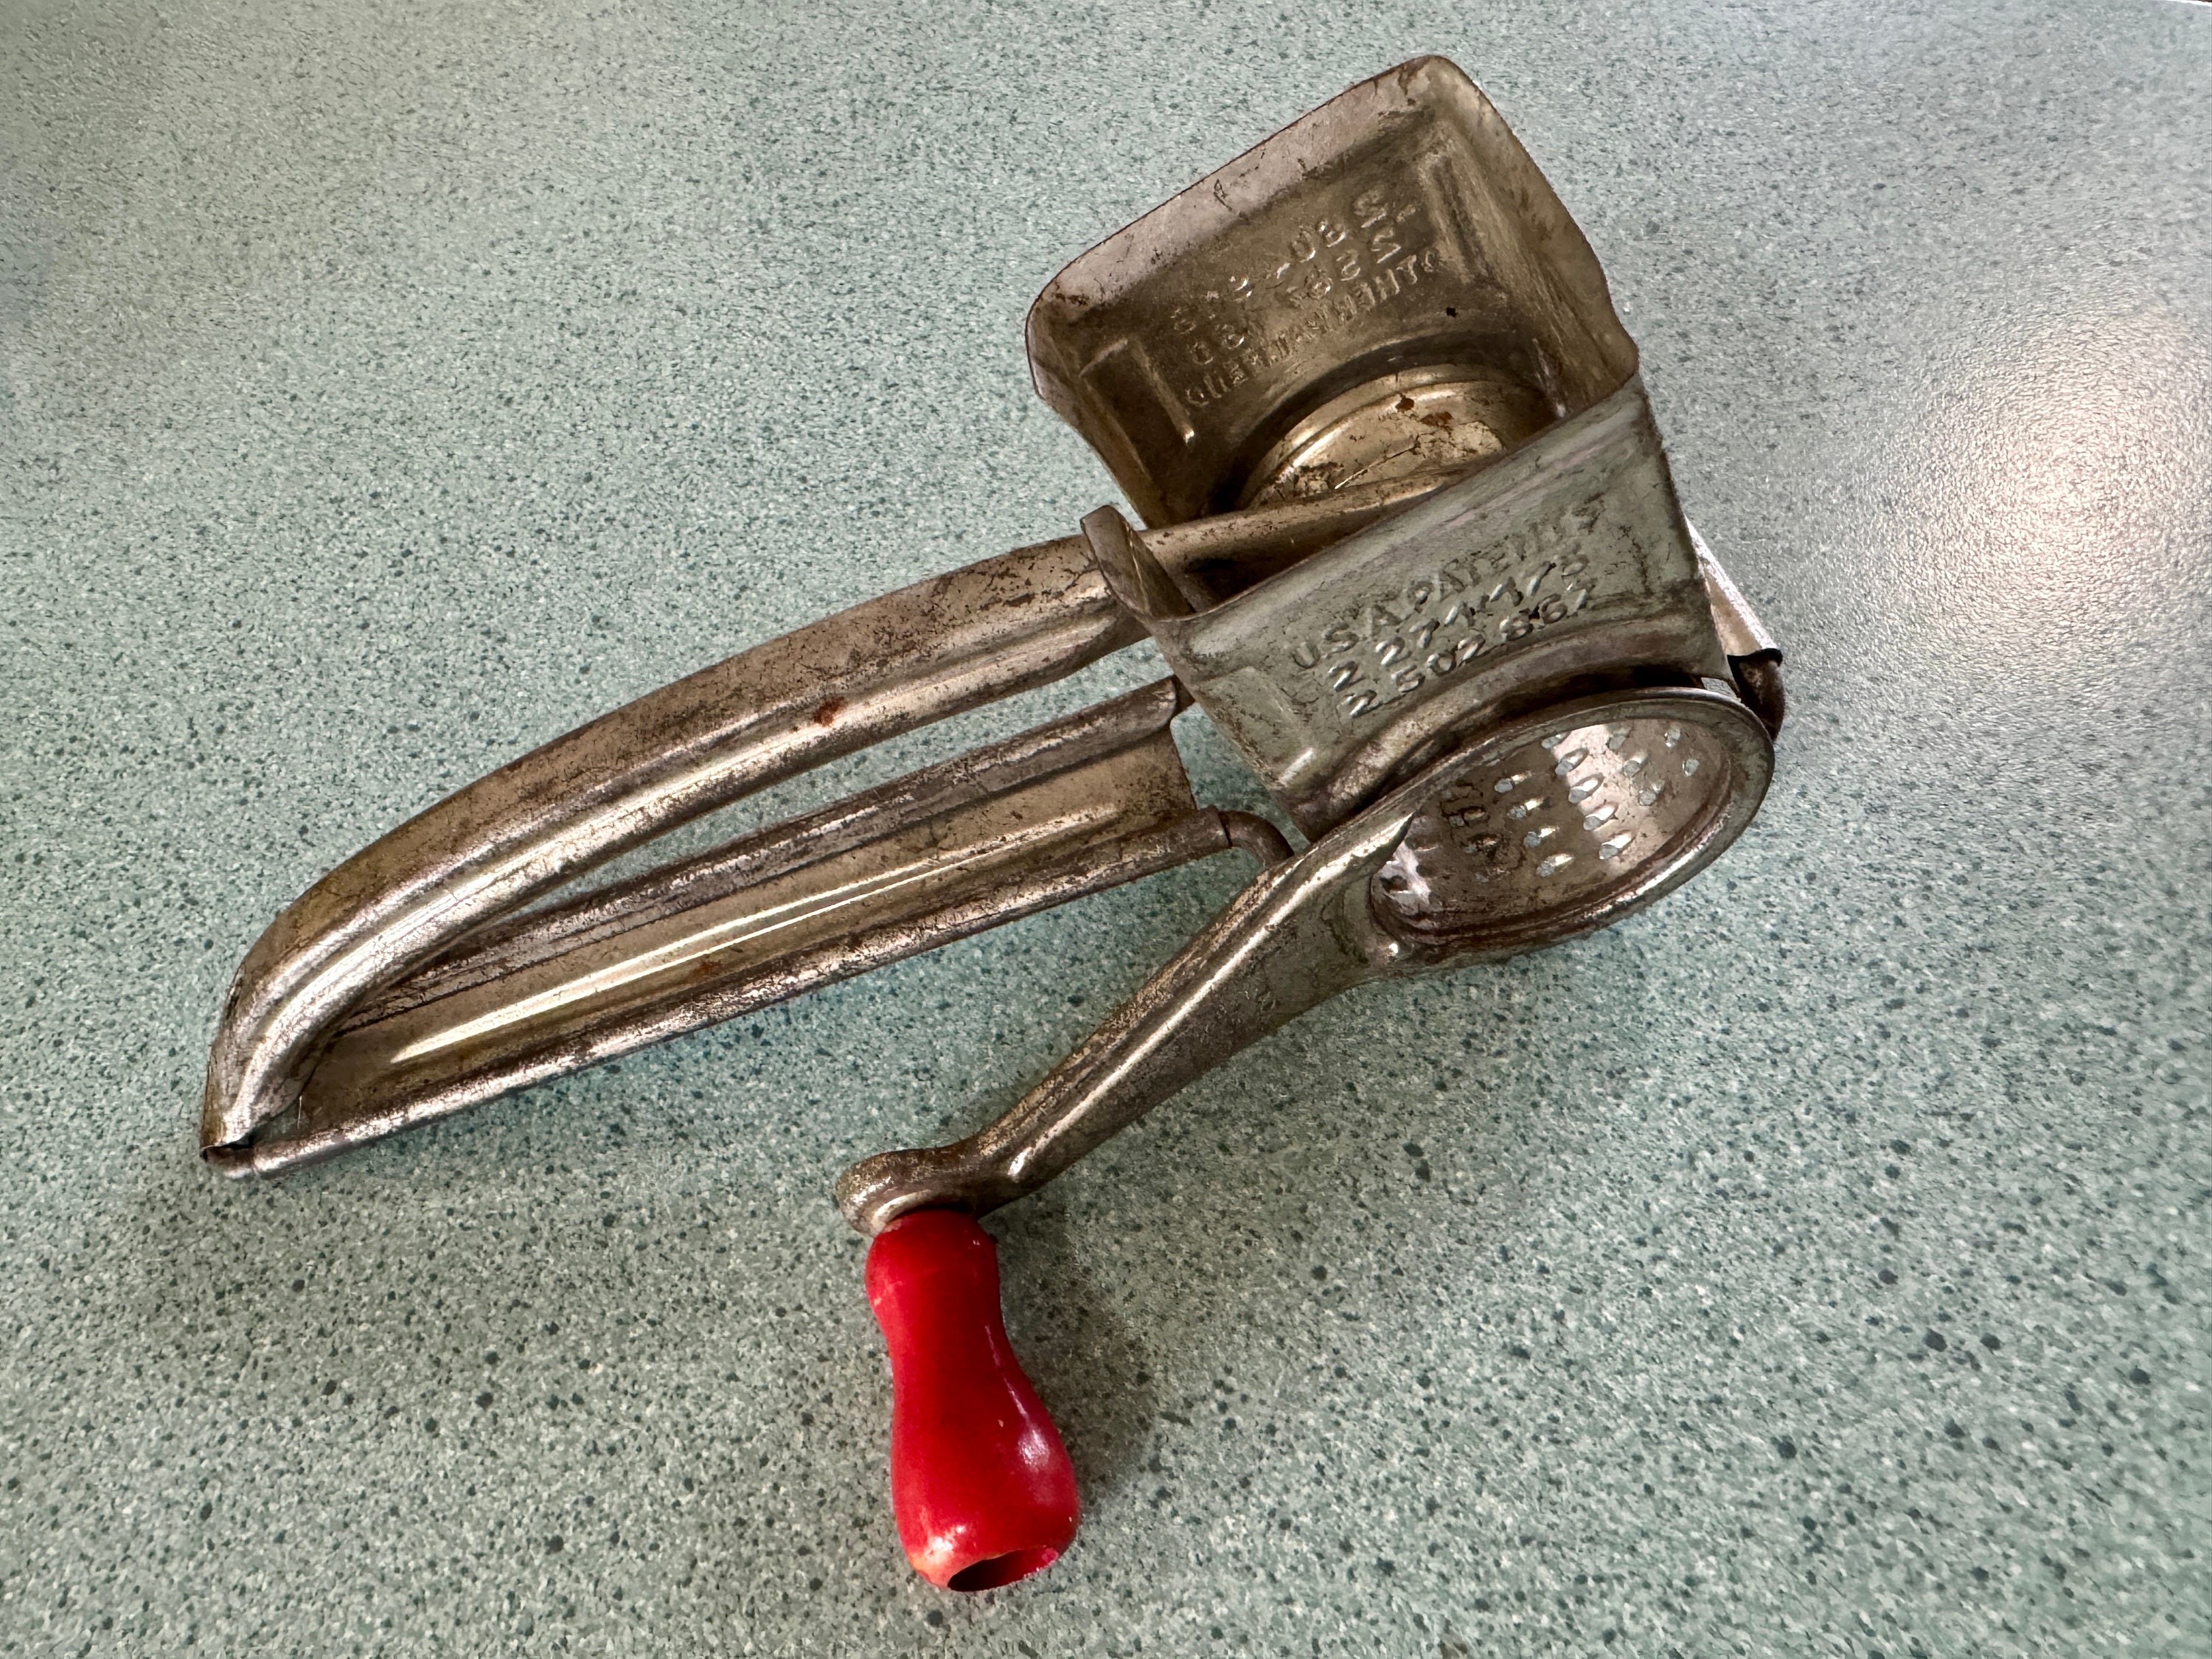 Vintage Mouli Cheese Grater Red Handle